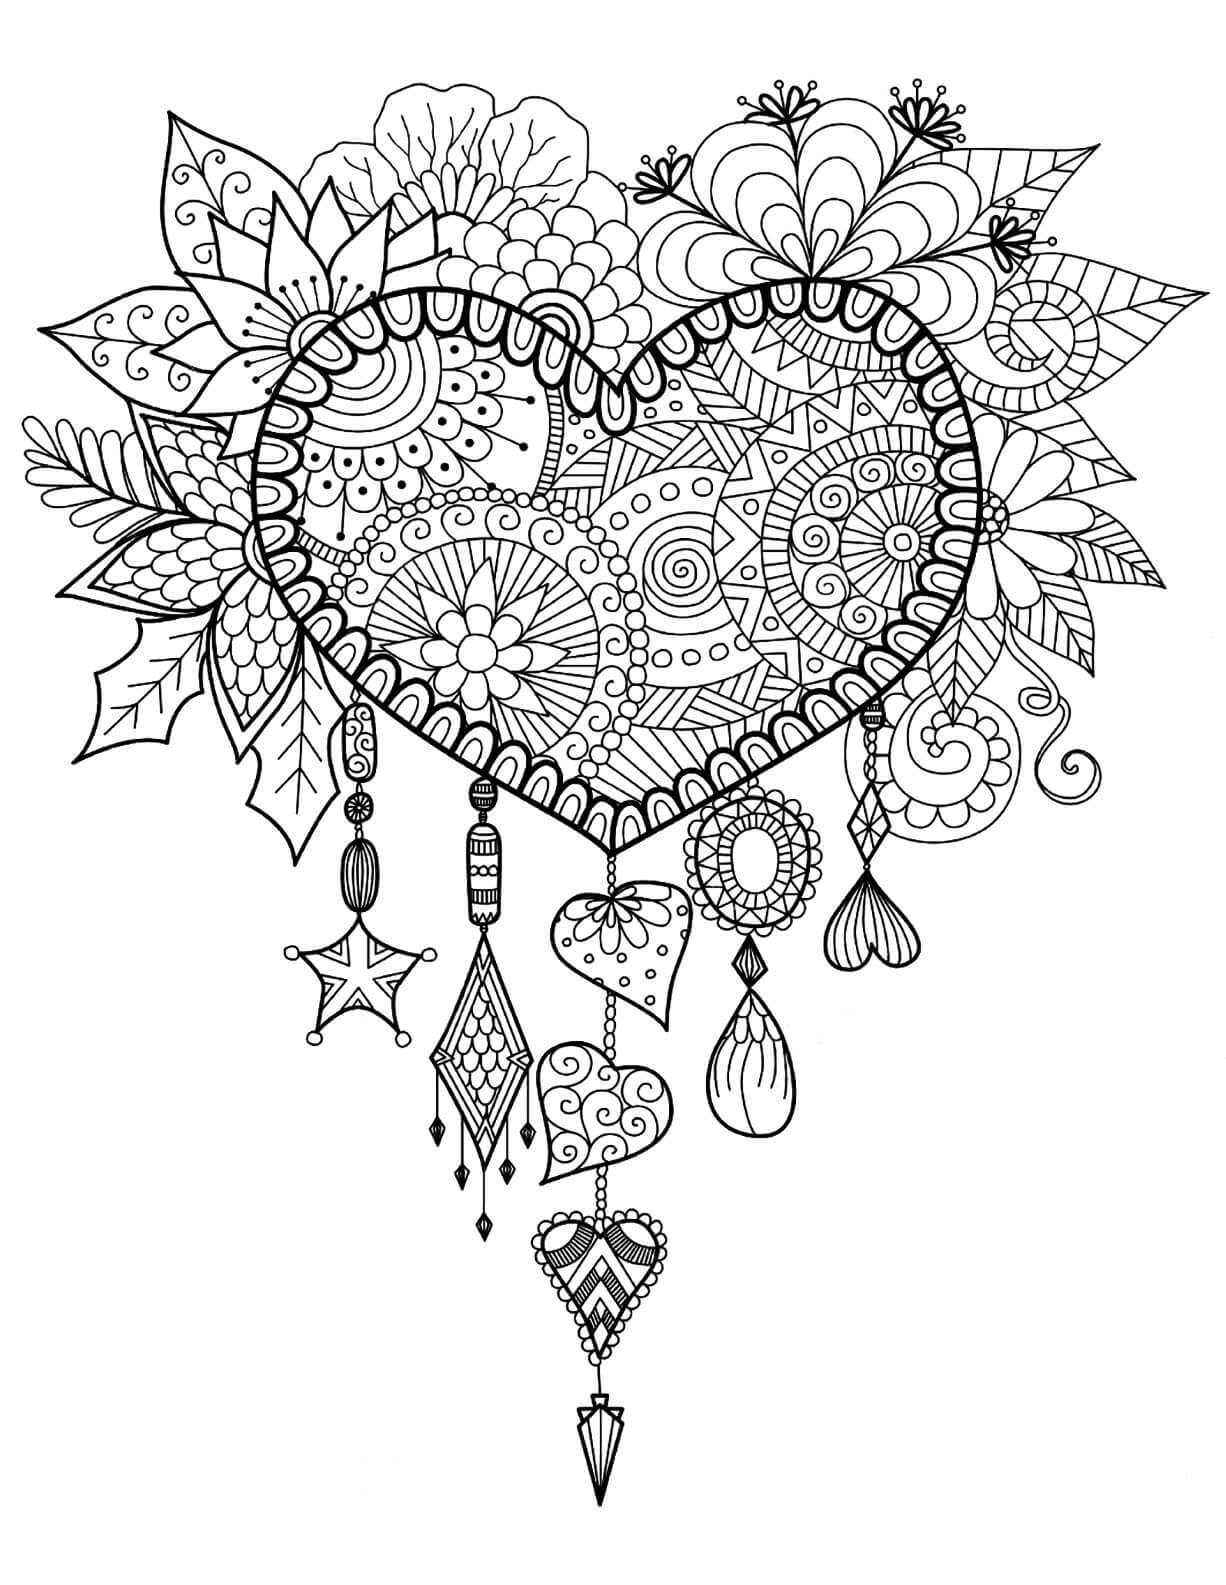 heart coloring pages for adults printable | human heart coloring pages for adults | free heart coloring pages for adults